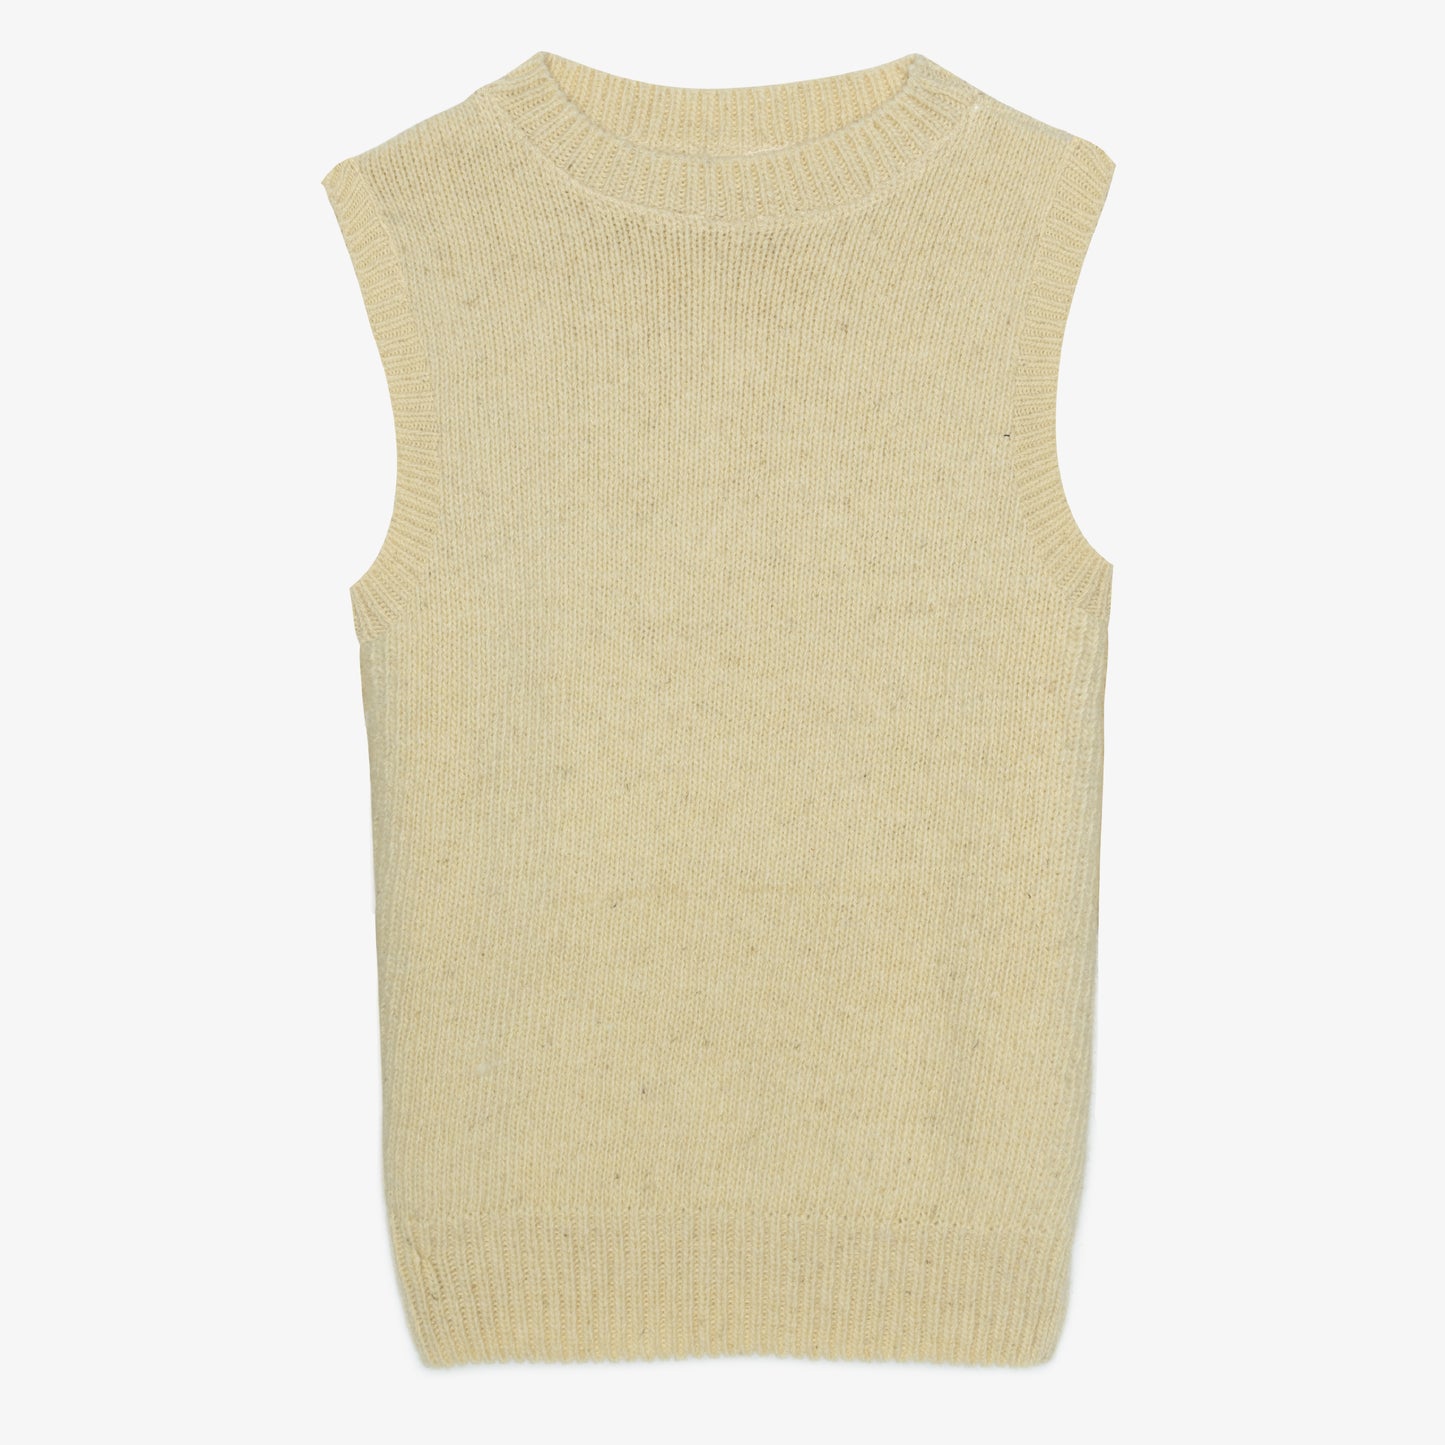 The Wool Project Vest